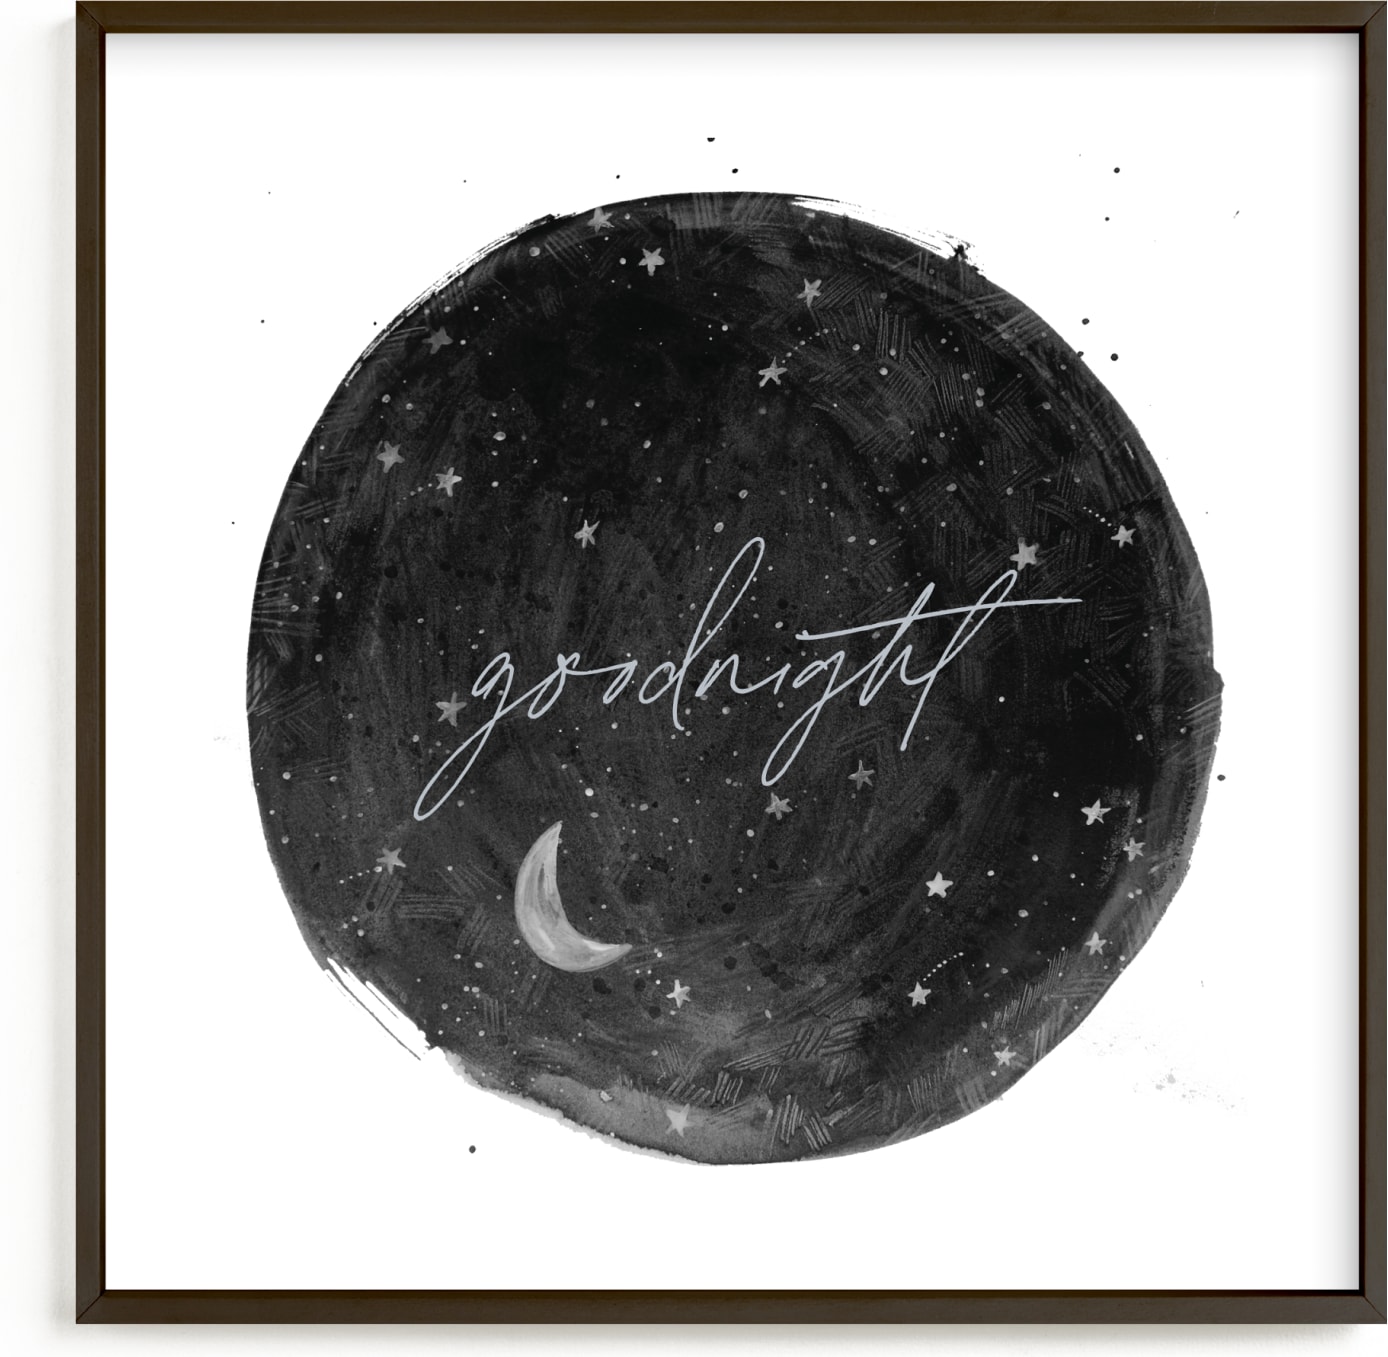 This is a black and white nursery wall art by Krissy Bengtson called Constellations.